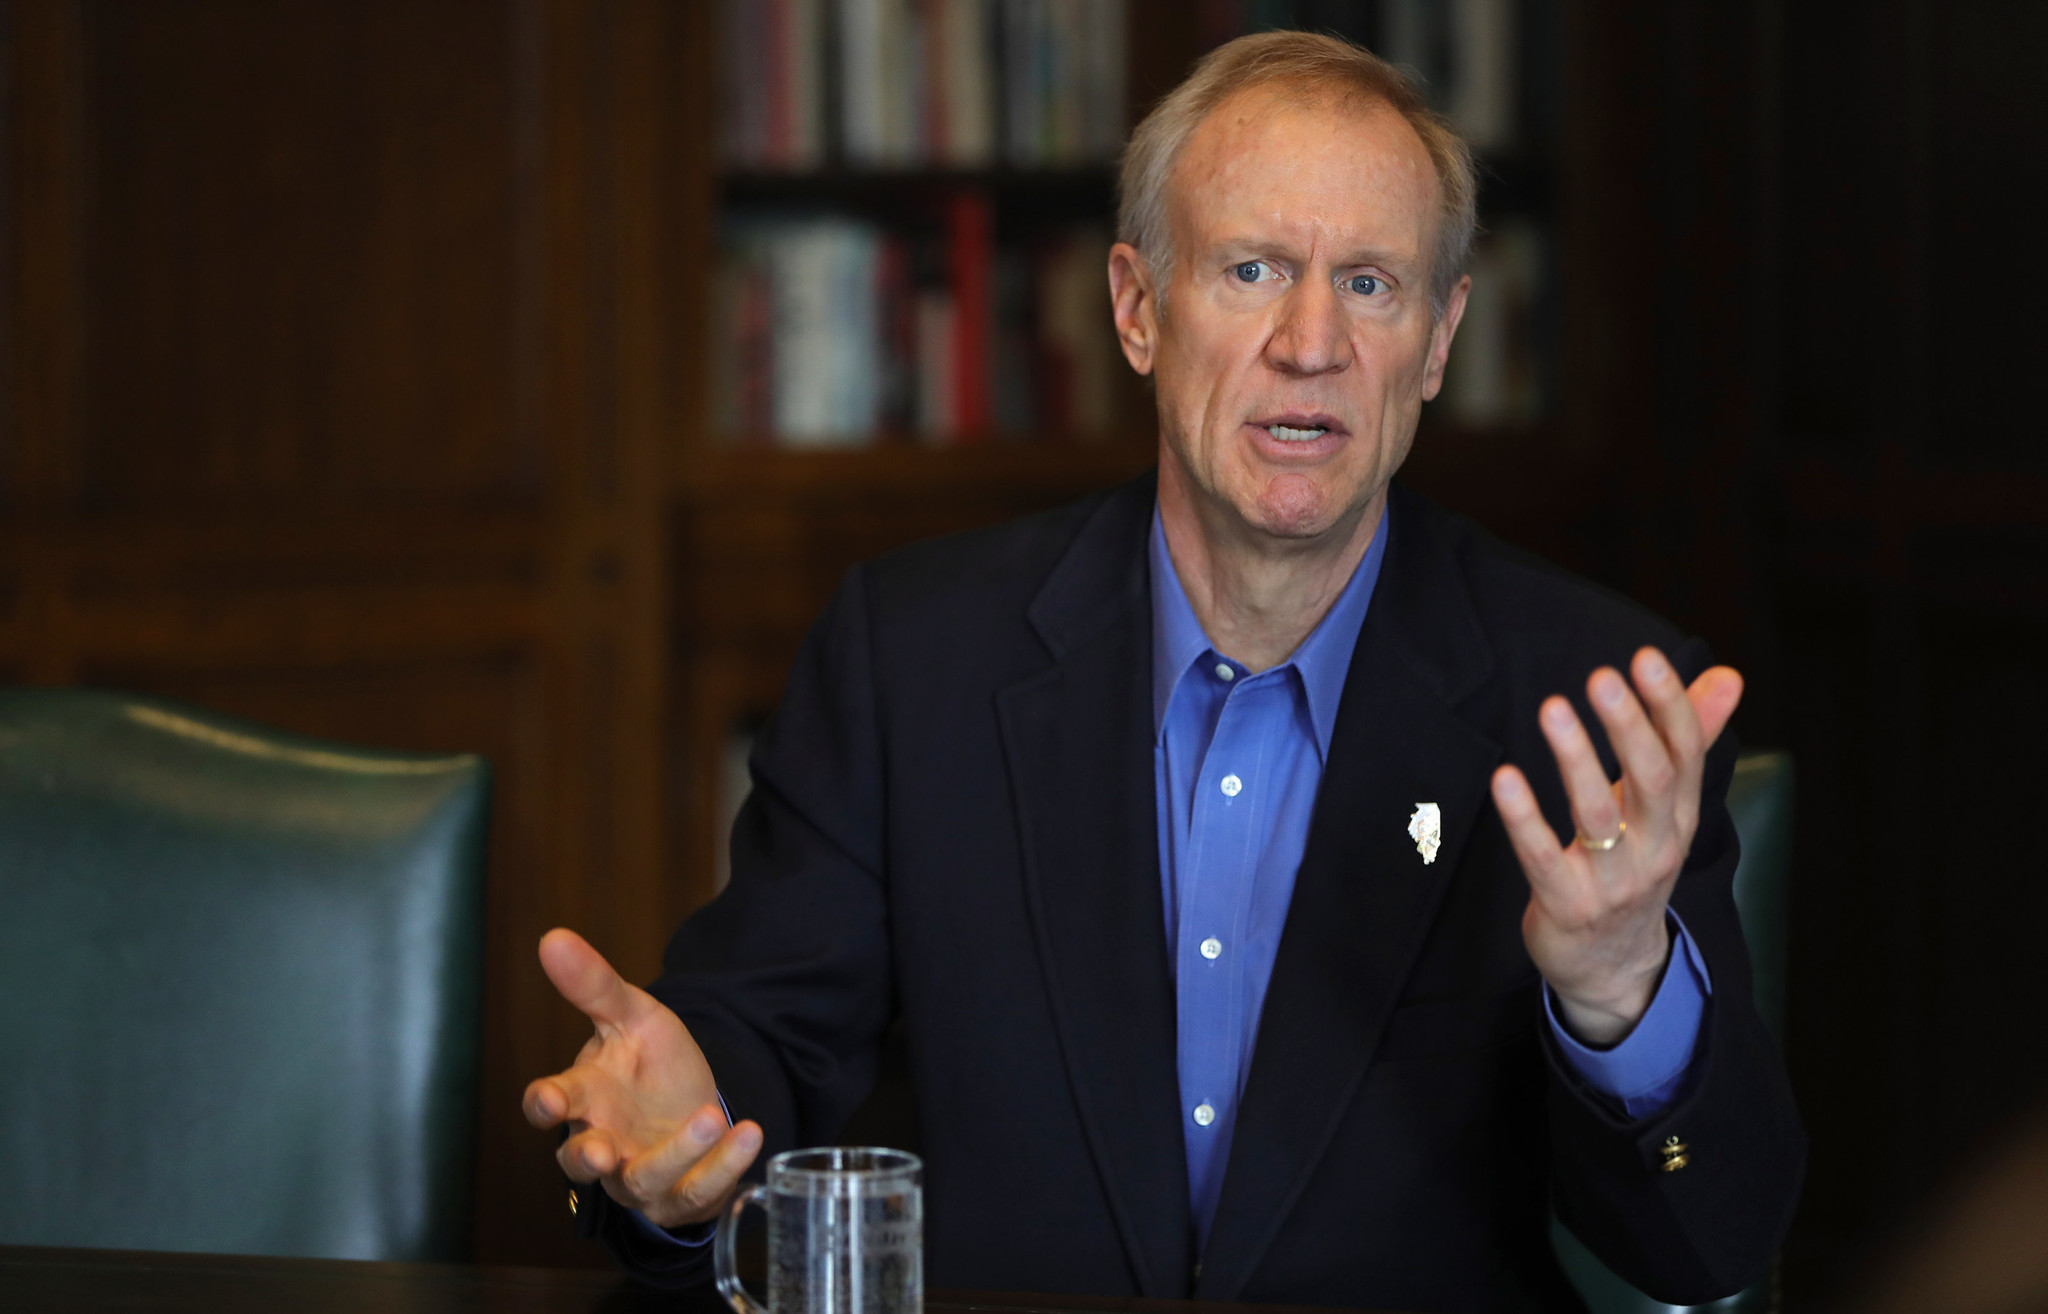 Morning Spin: Rauner hits Facebook Live ahead of budget speech - Chicago Tribune